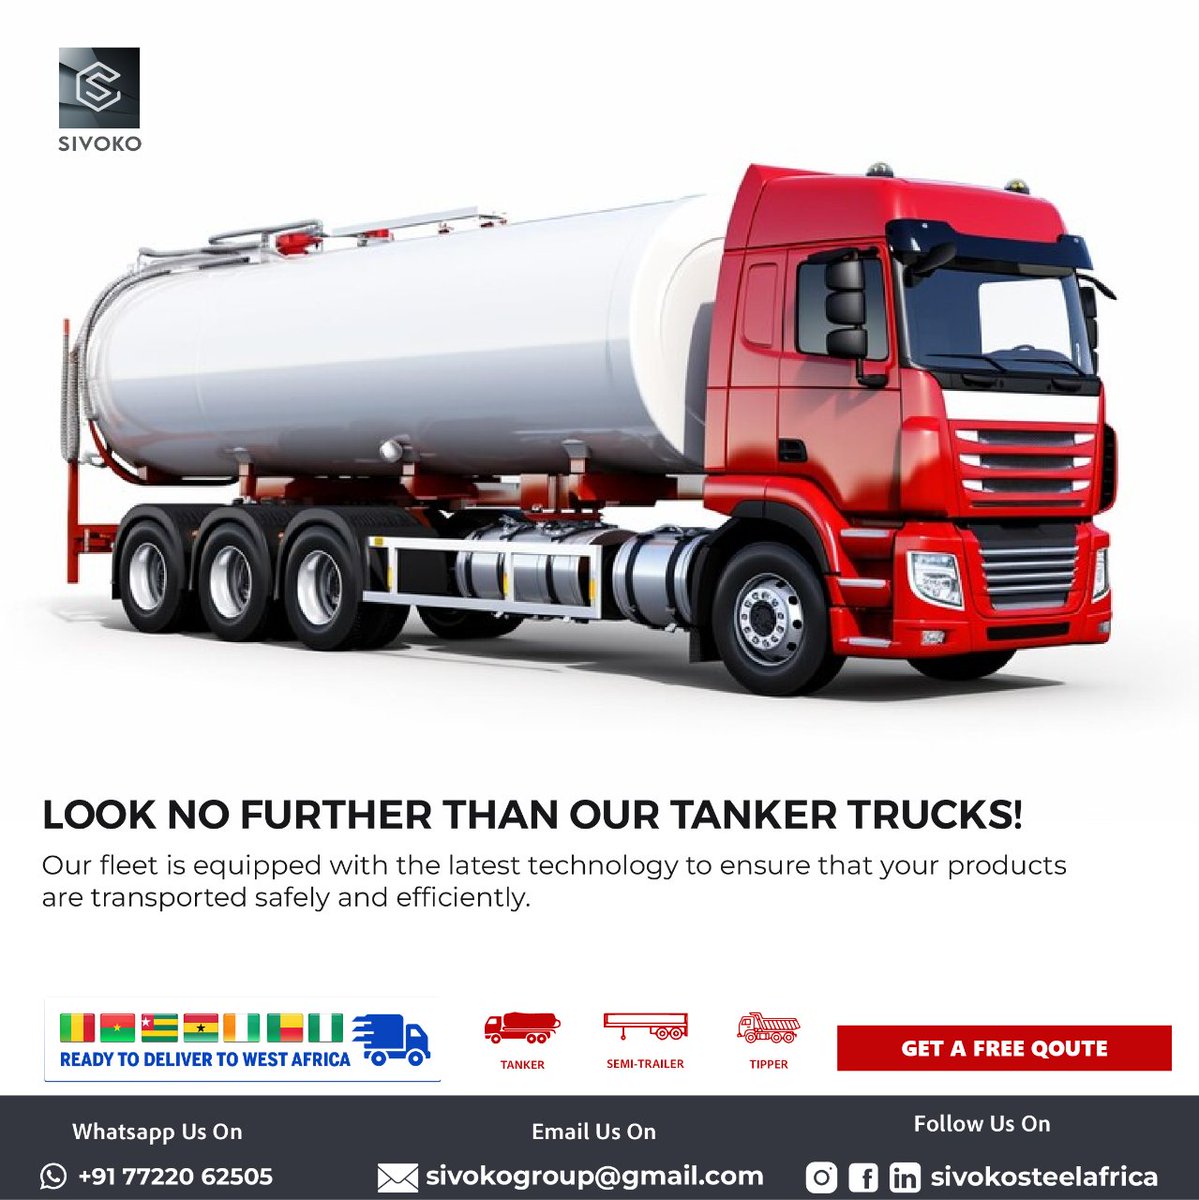 Sivoko Tankers: Fueling the Future of Transportation 🚢⛽
Get A Free Quote!

Whatsapp us: +917722062505
Email us: Sivokogroup@gmail.com

#sivokotankers #transportationsolutions #heavydutyhauling